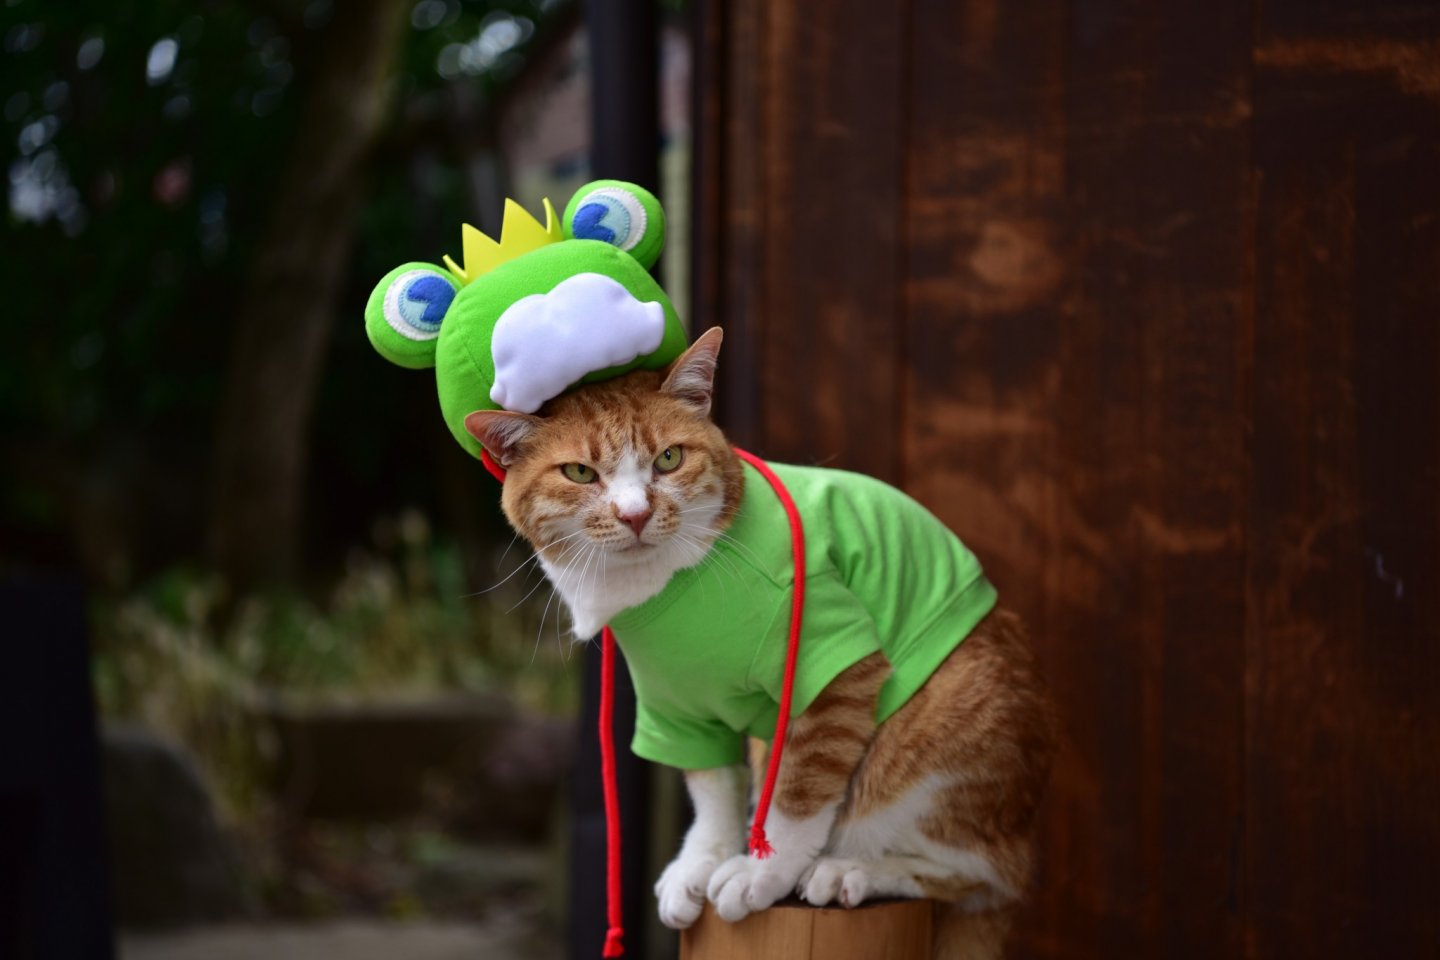 The star of the festival: cat frog